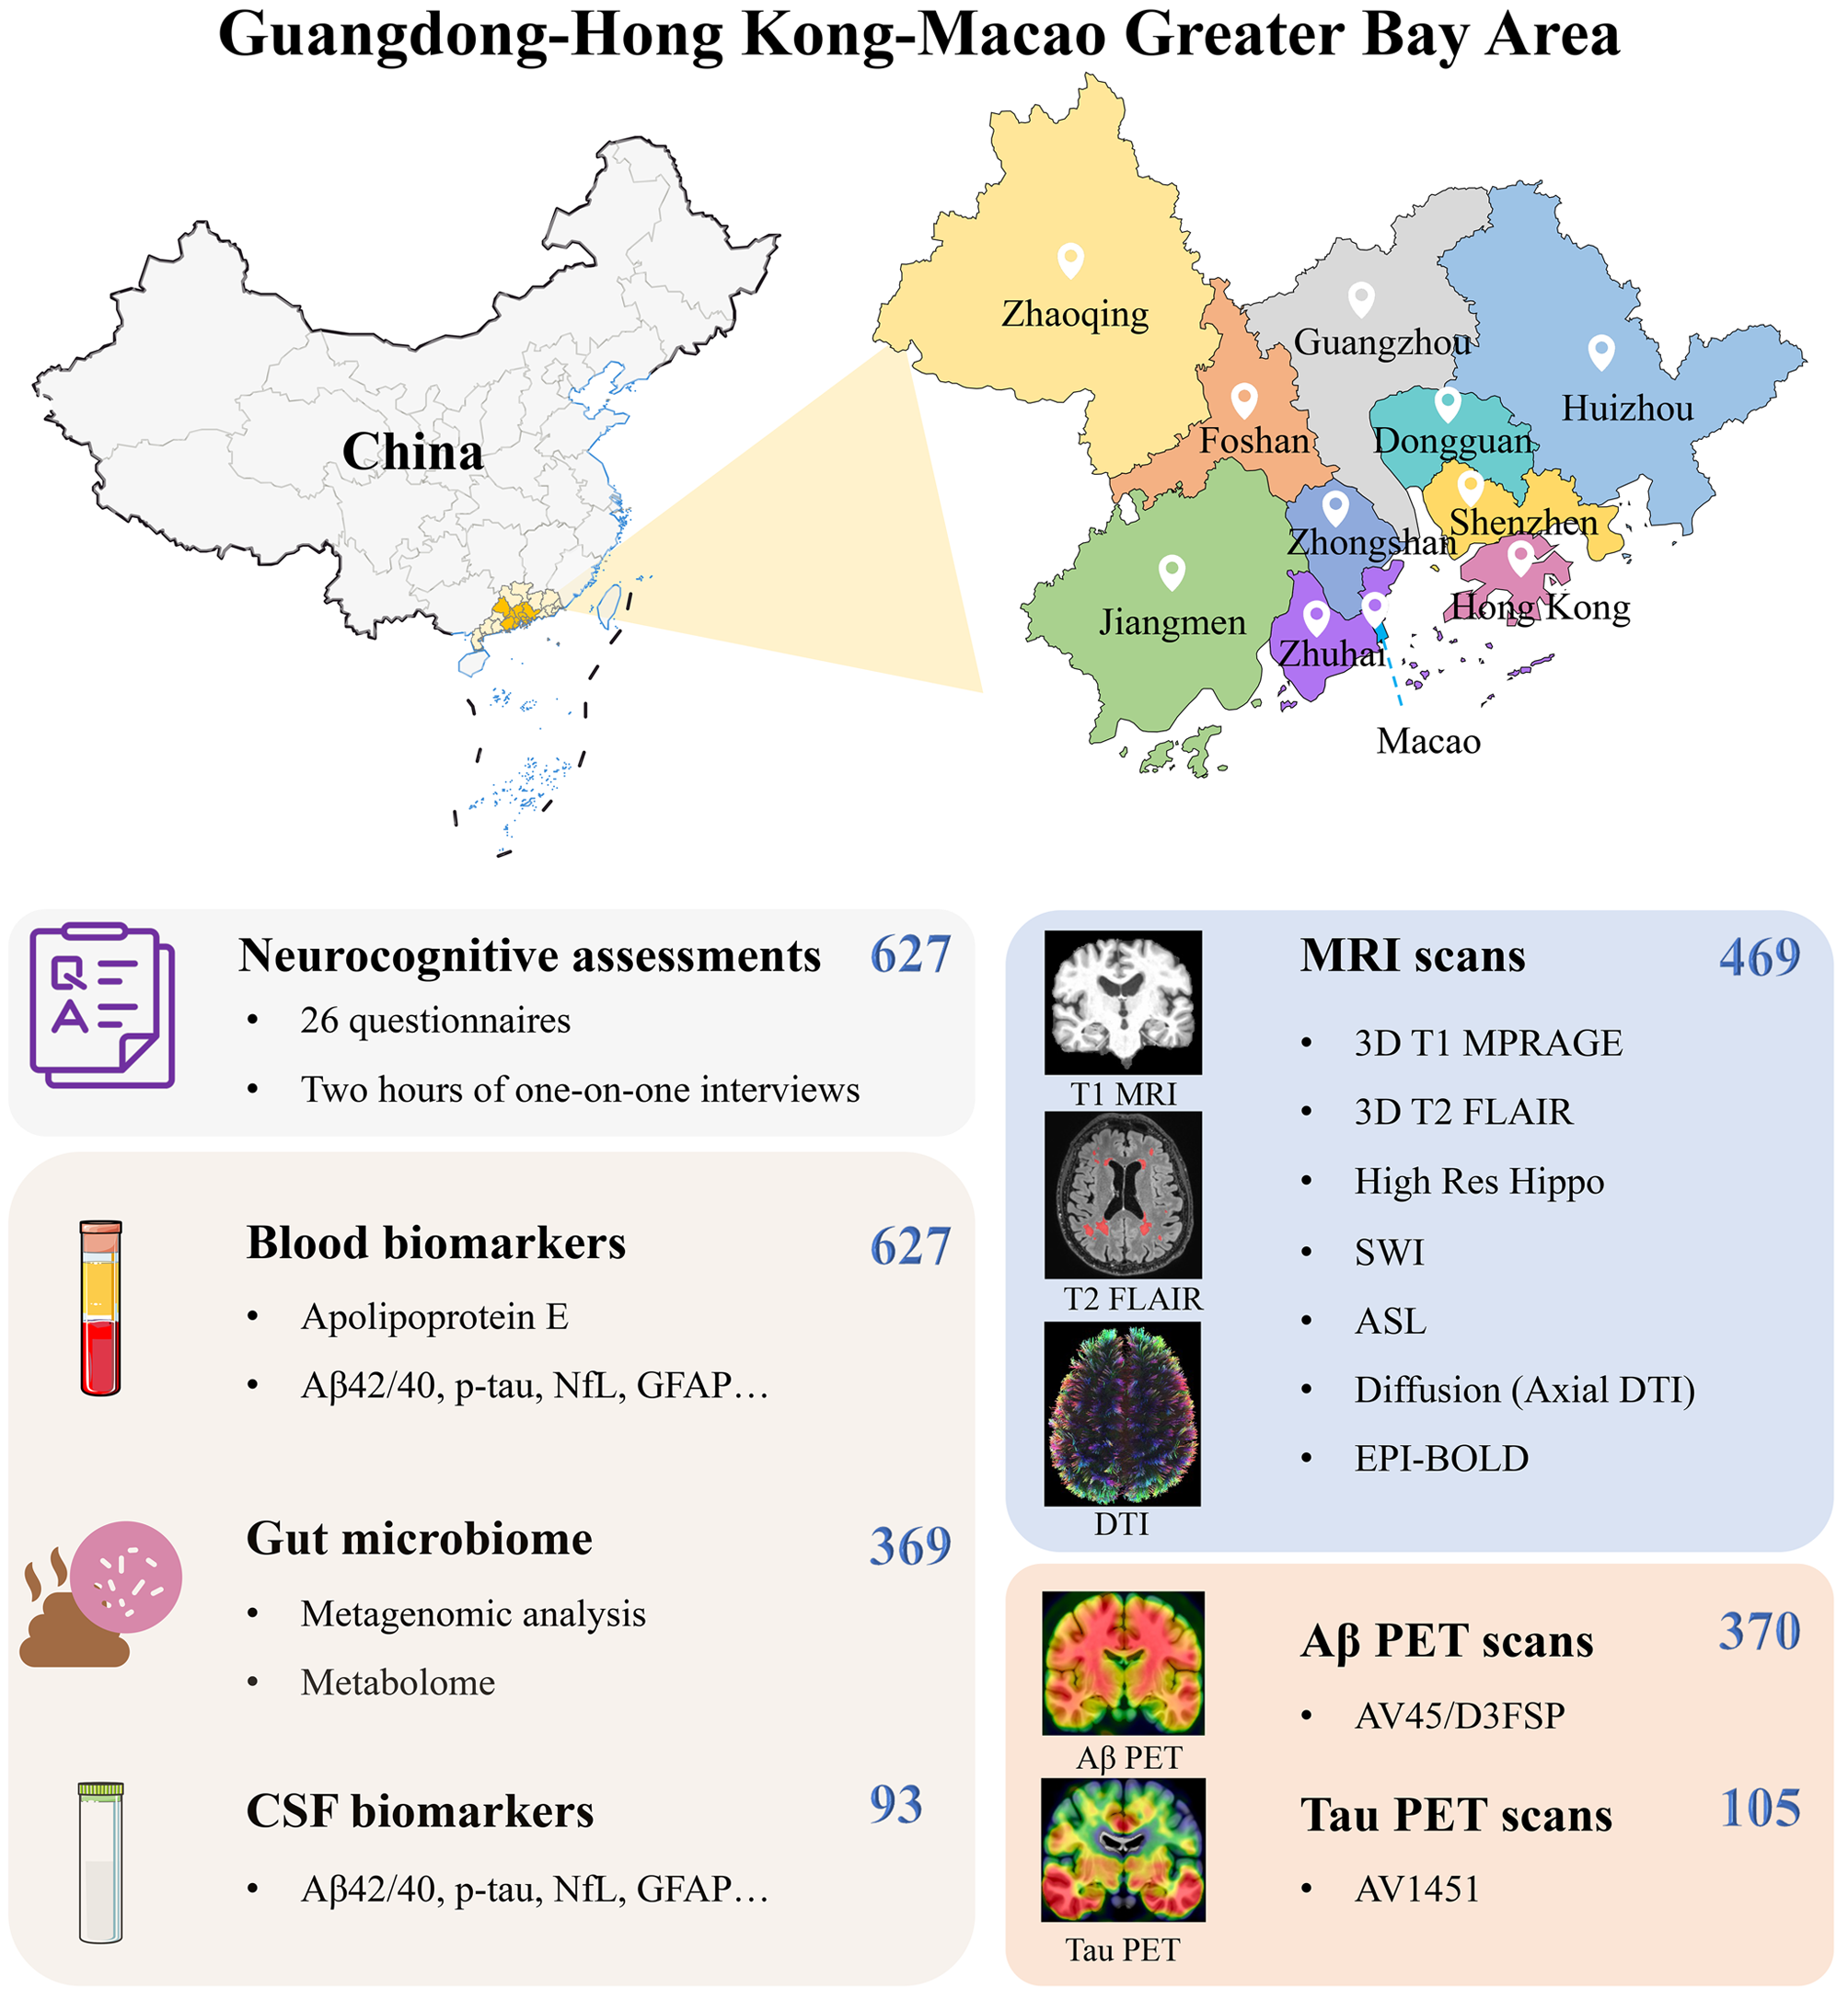 Pathophysiology characterization of Alzheimer’s disease in South China’s aging population: for the Greater-Bay-Area Healthy Aging Brain Study (GHABS)